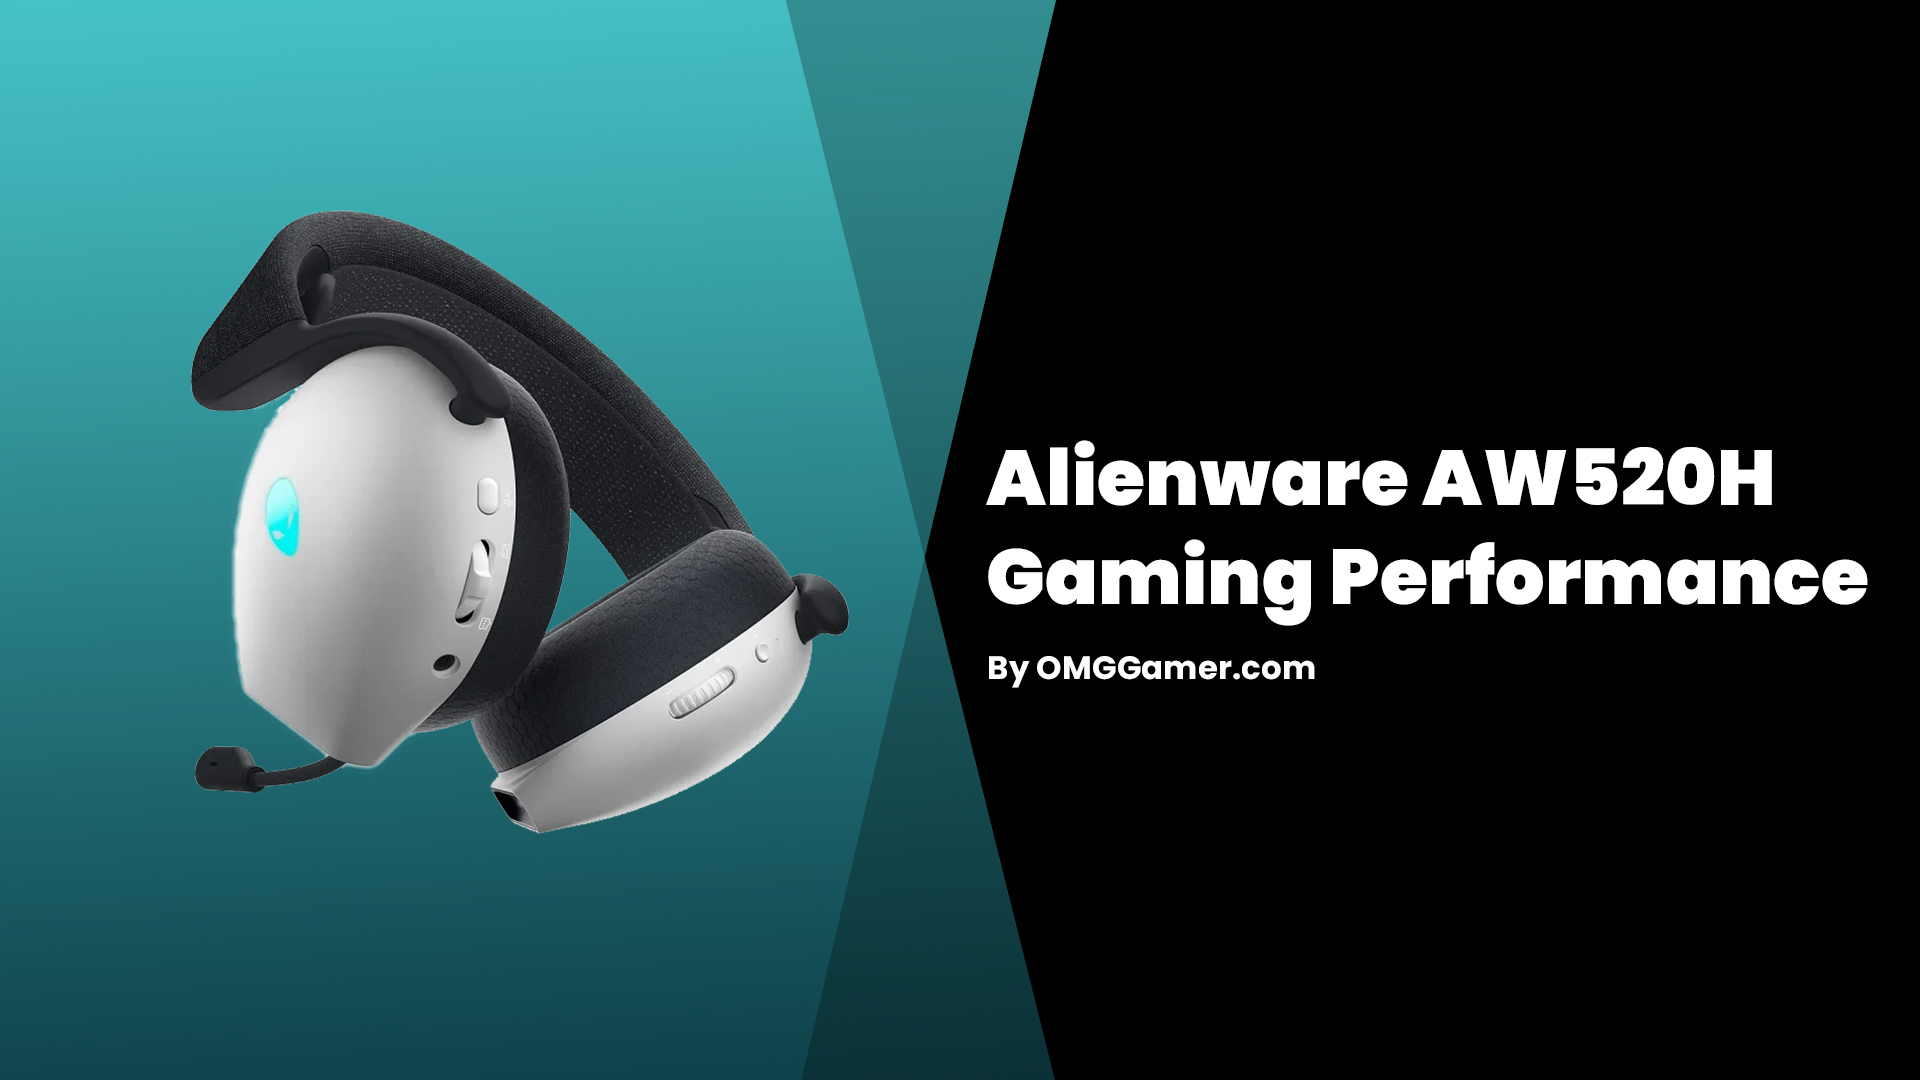 Alienware AW520H Gaming Performance